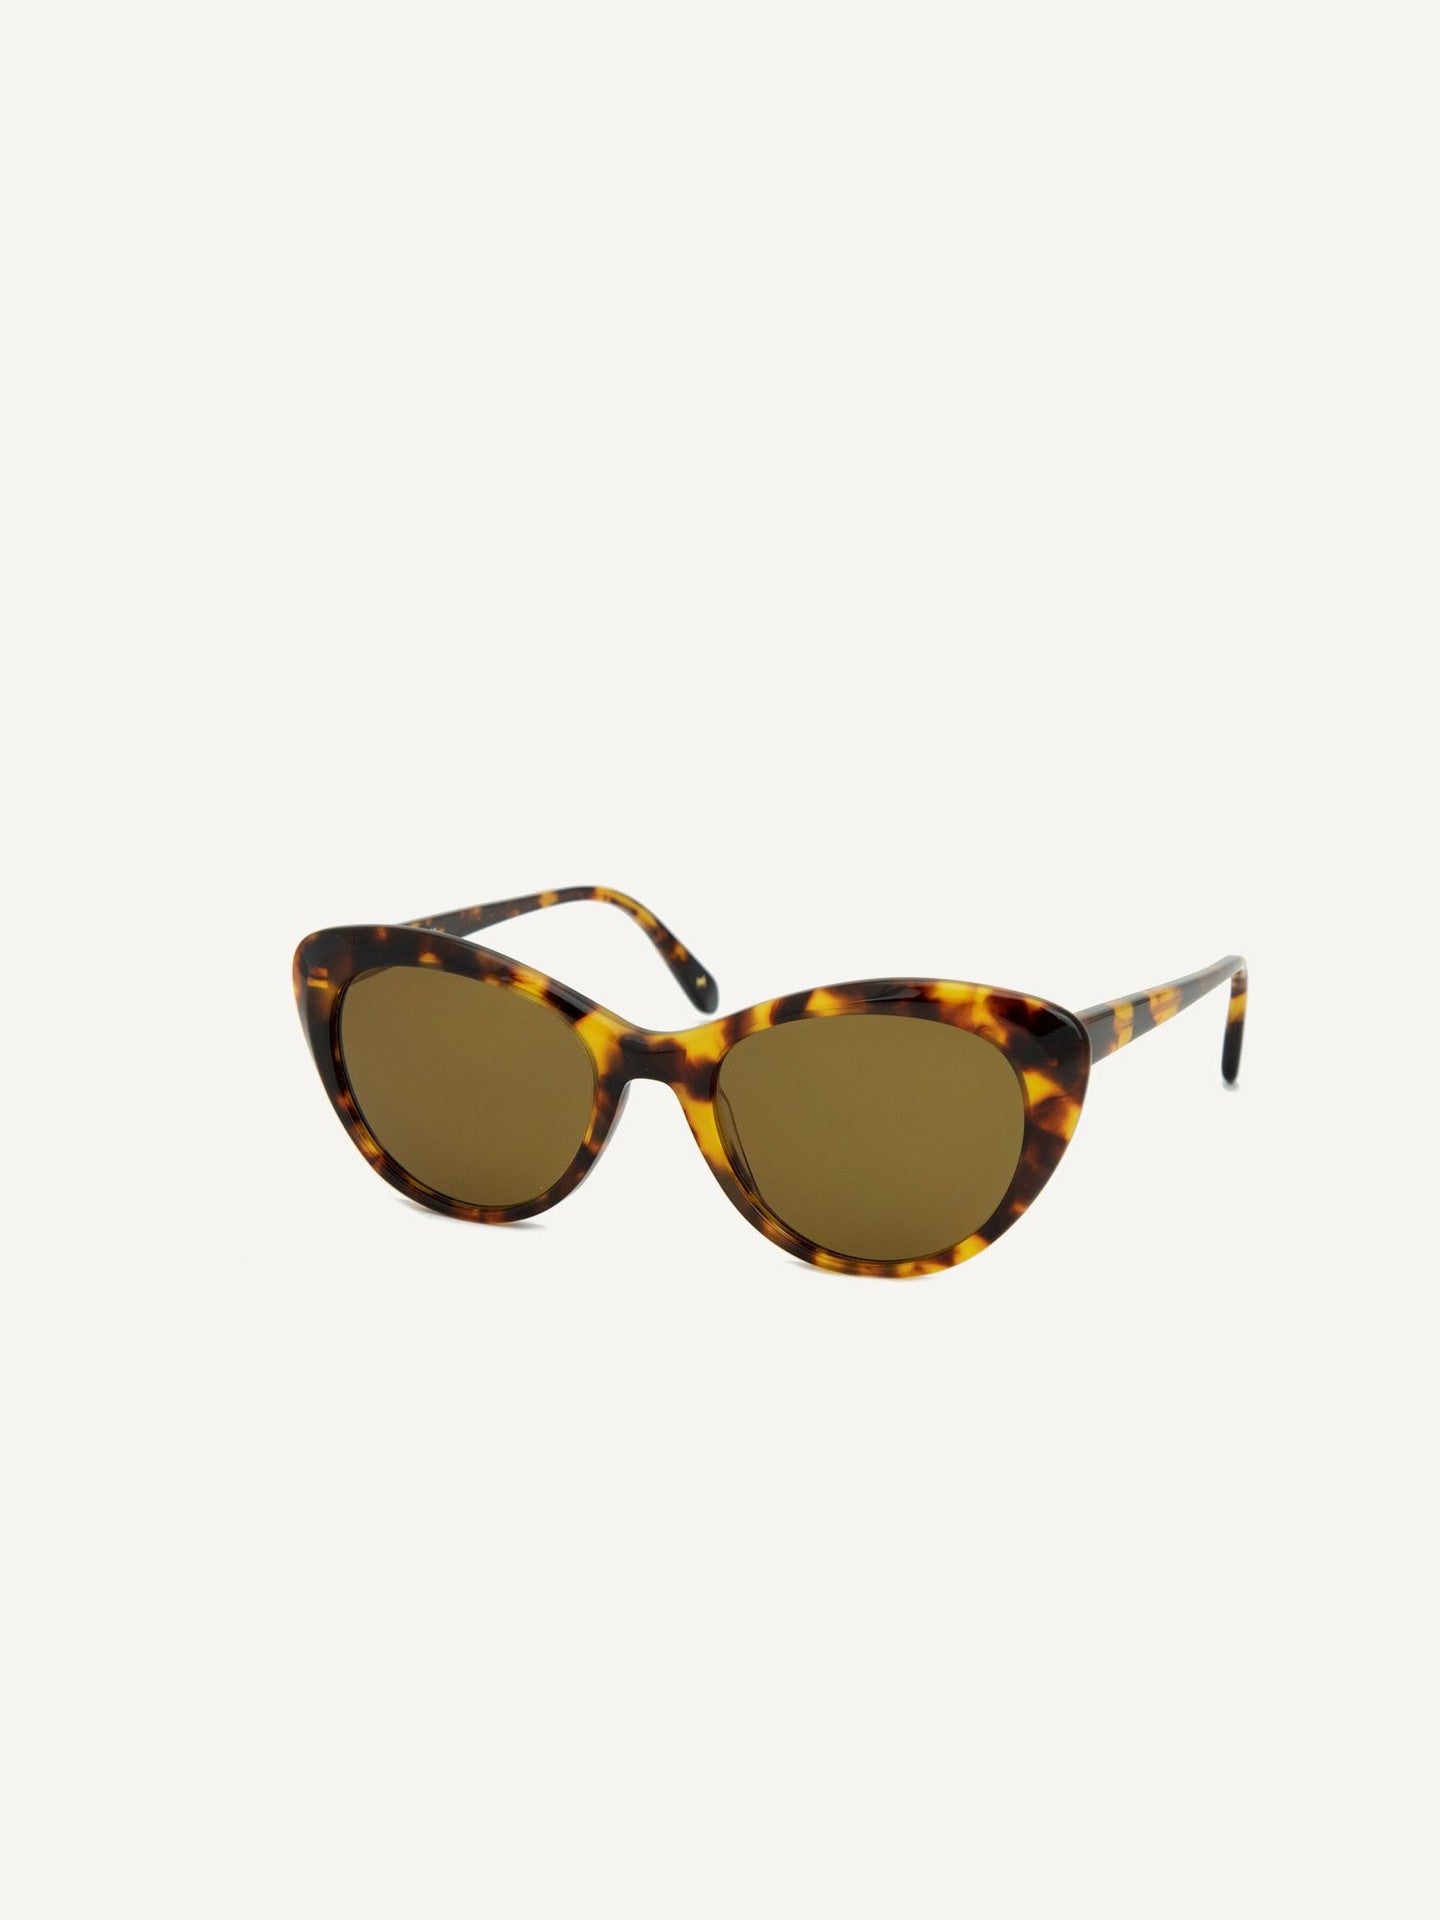 A pair of Montpellier Sunglasses – Yellow Havana by Dick Moby on a white background.